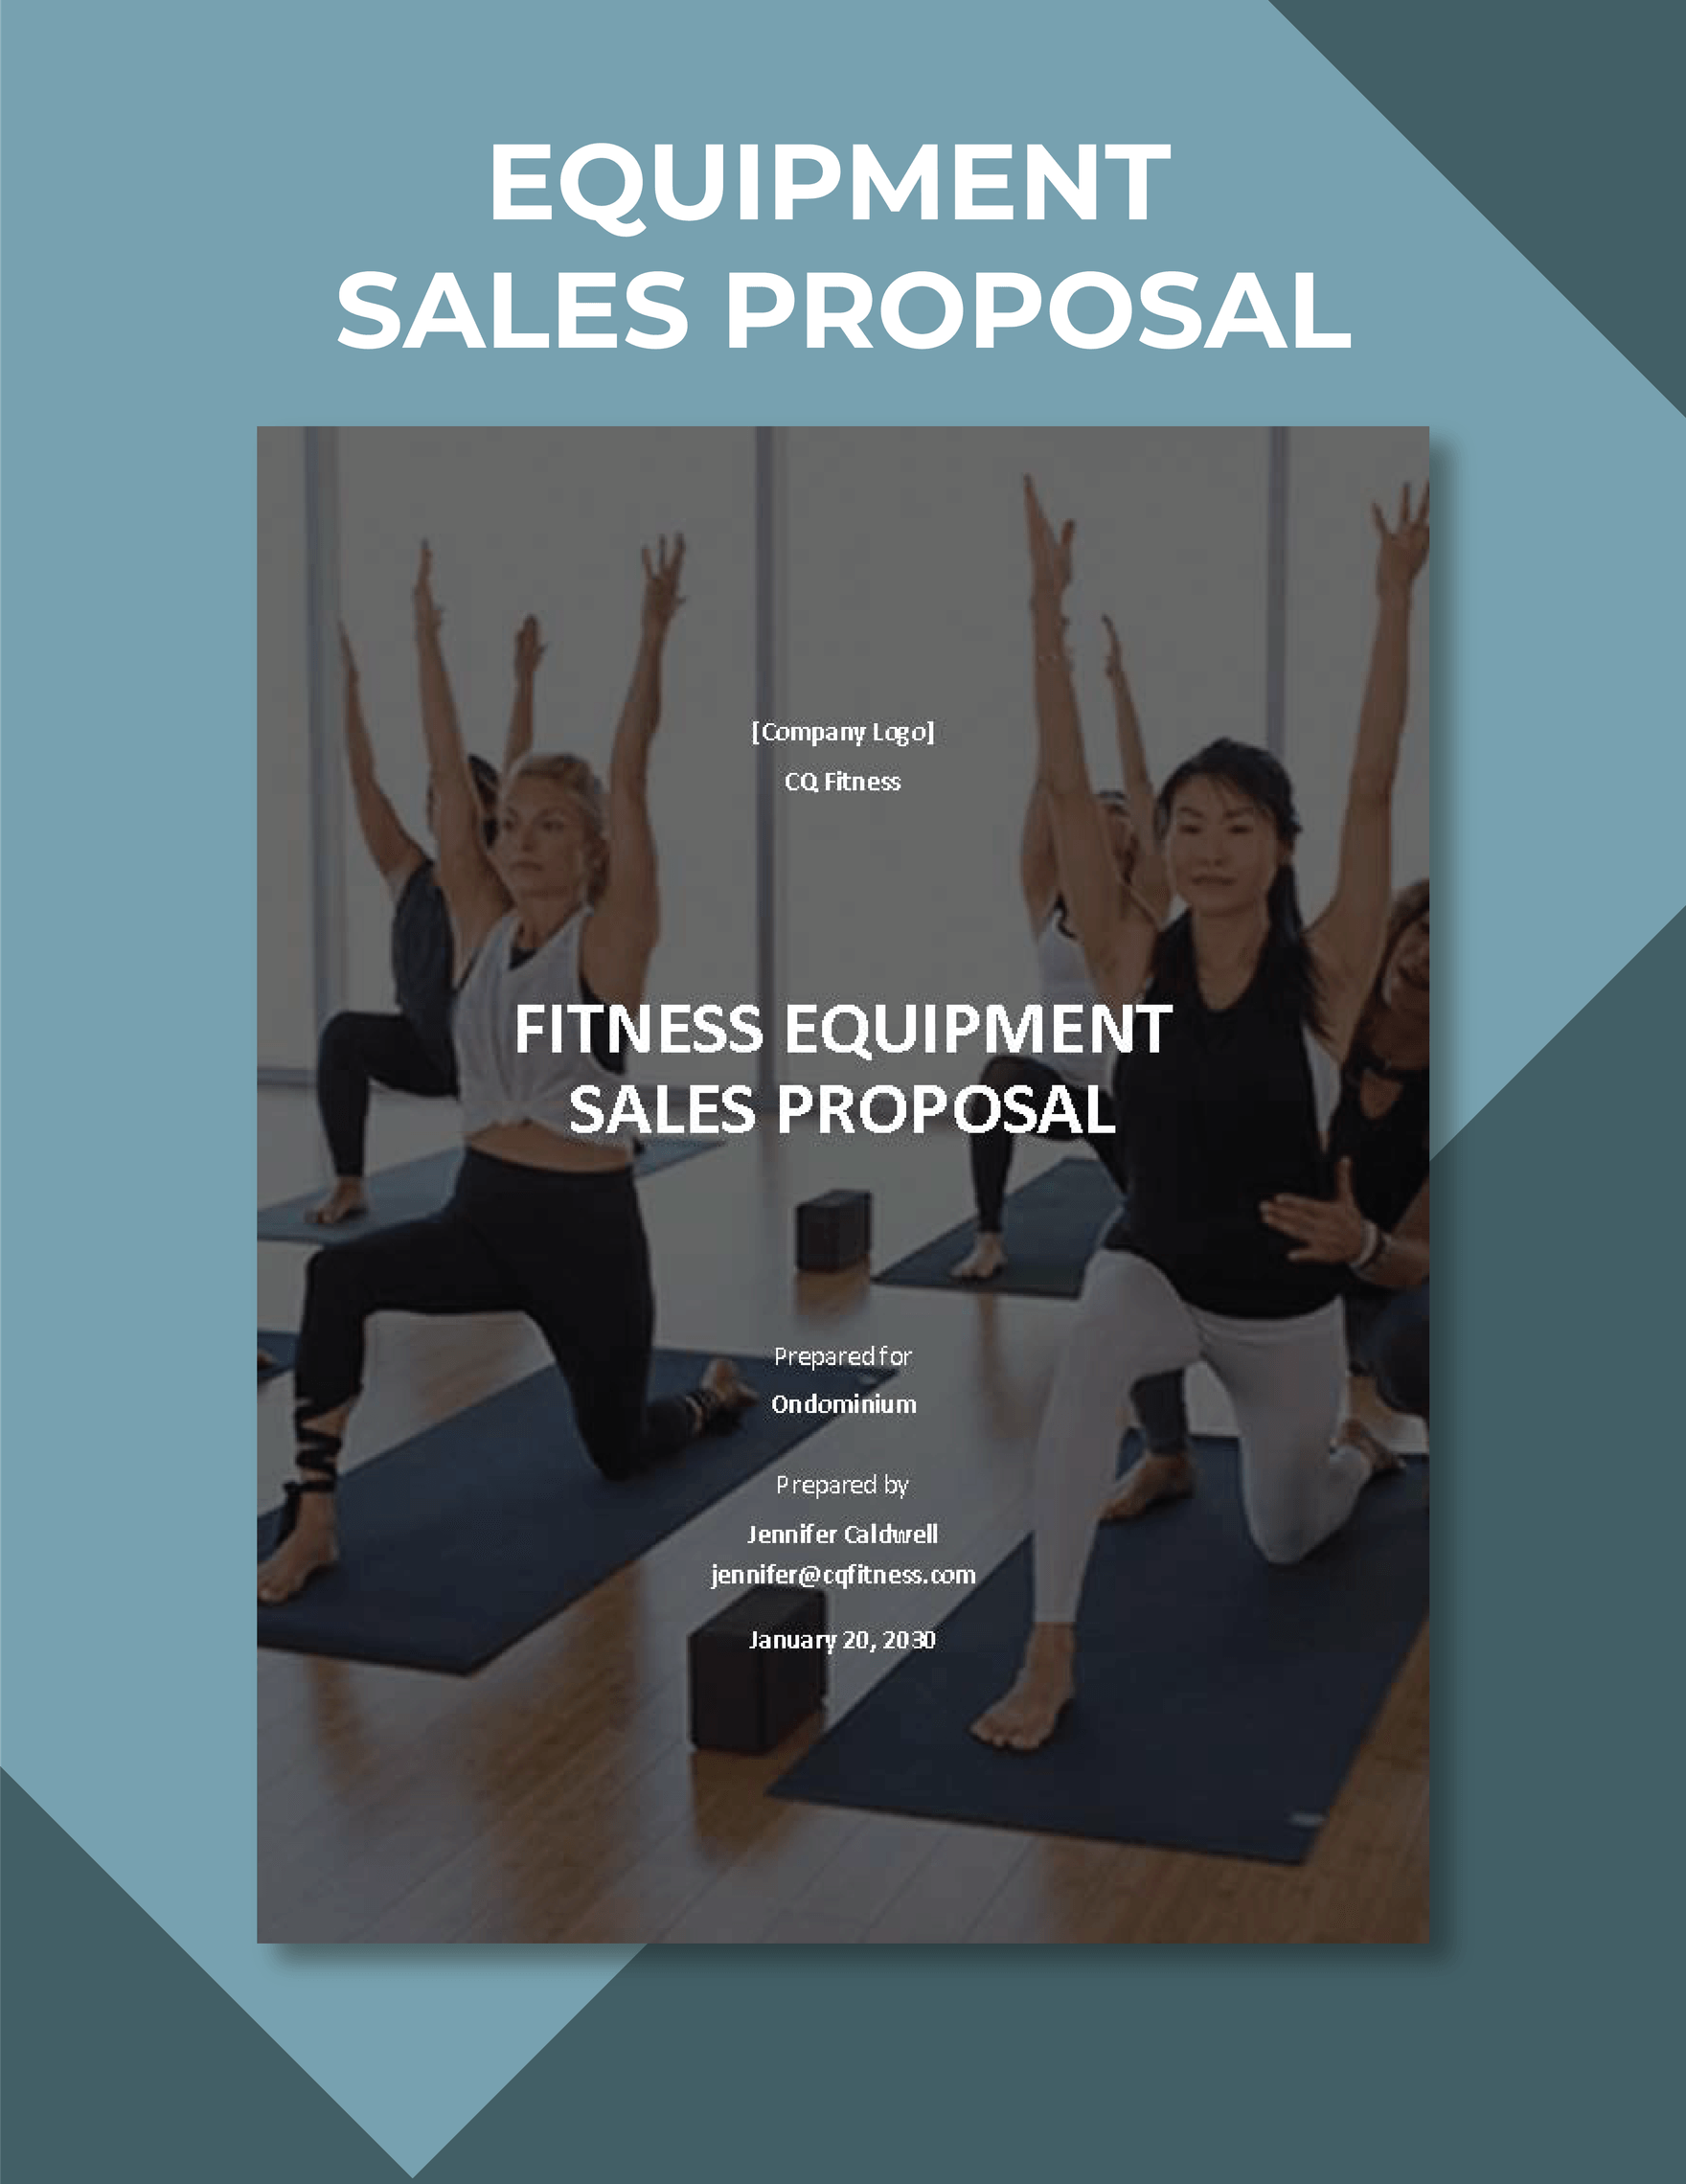 Equipment Sales Proposal Template in Word, Google Docs, Apple Pages